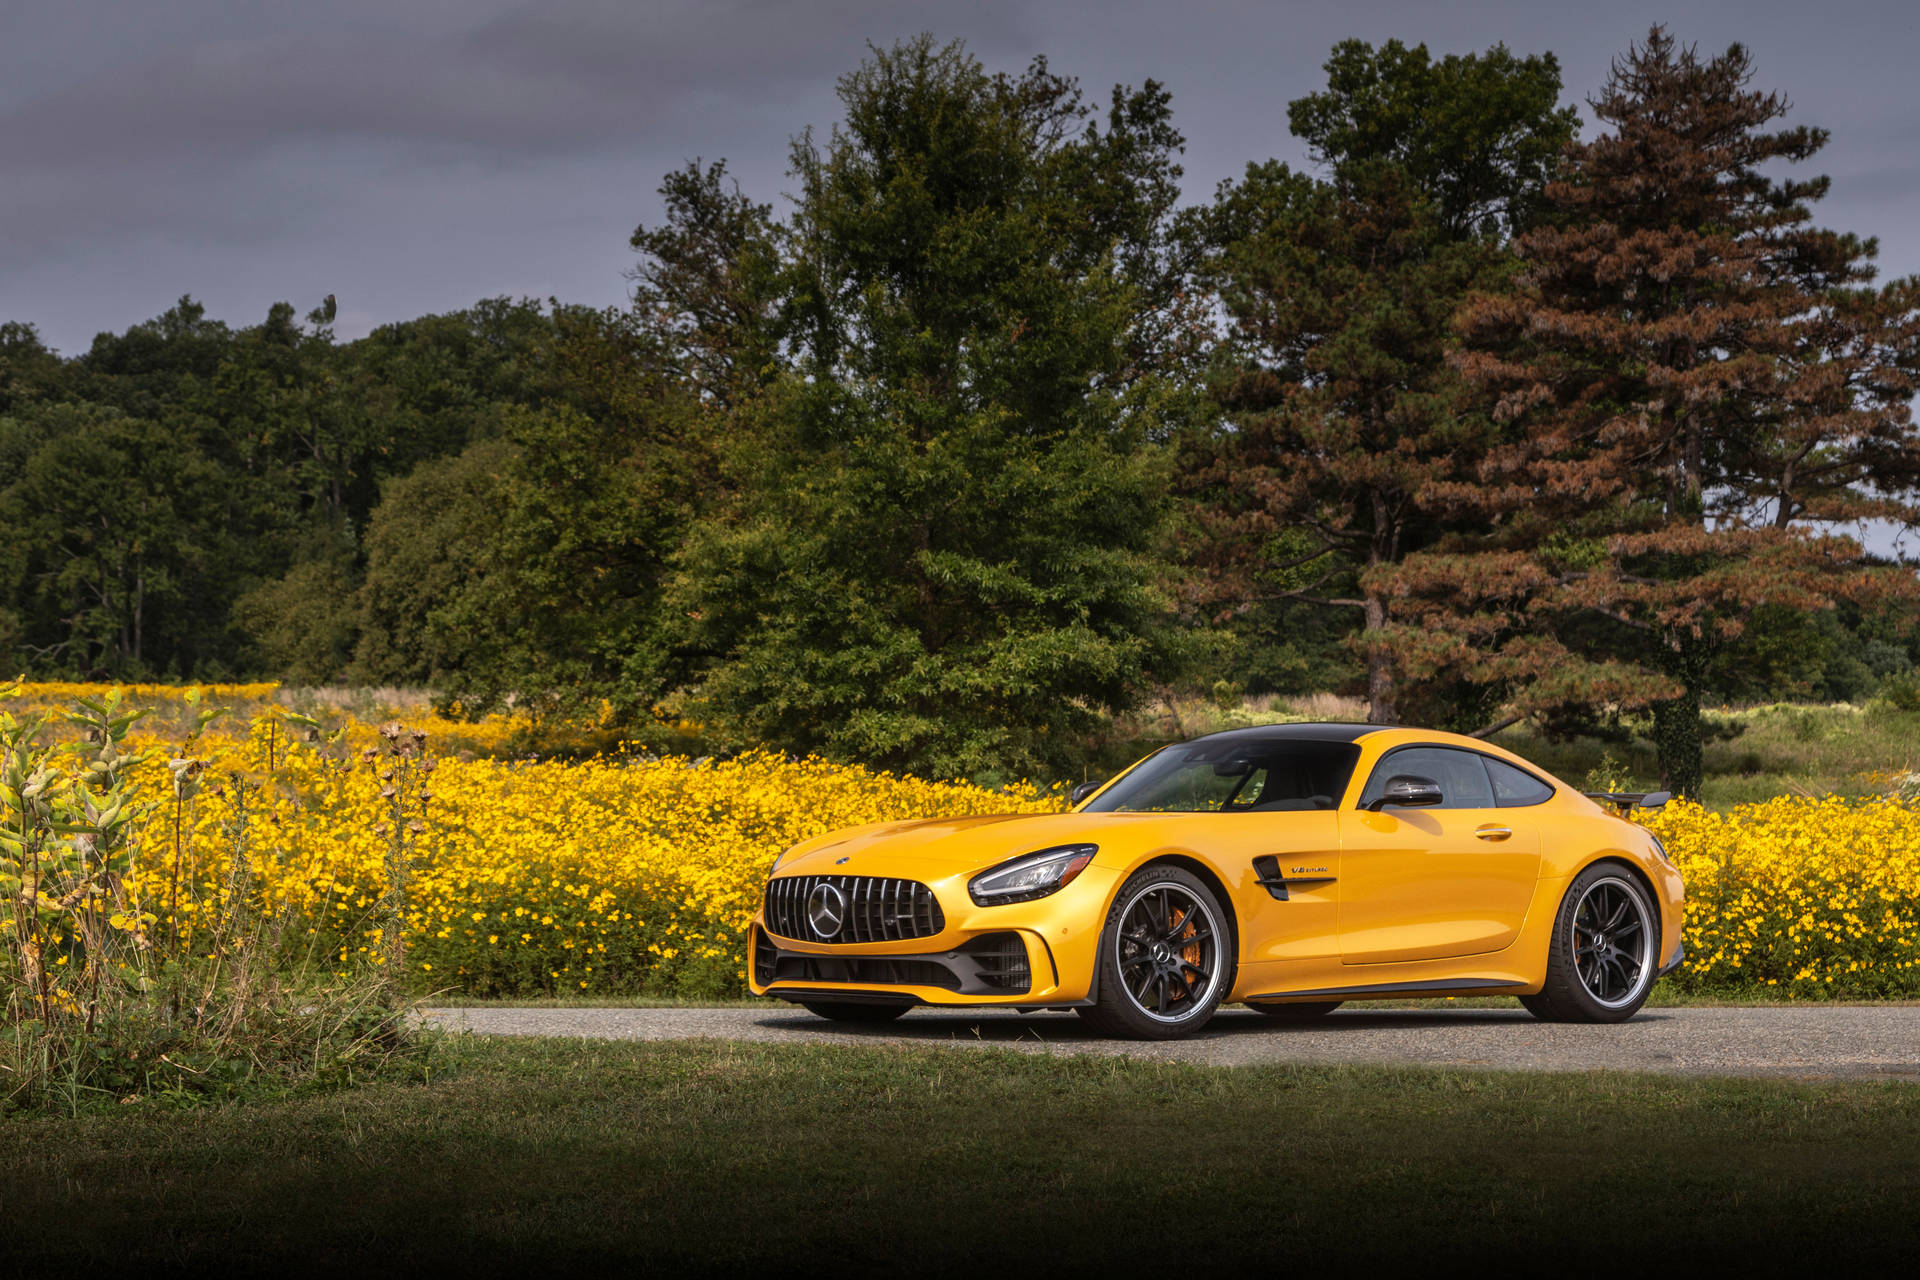 Golden Yellow Amg Gt R Background